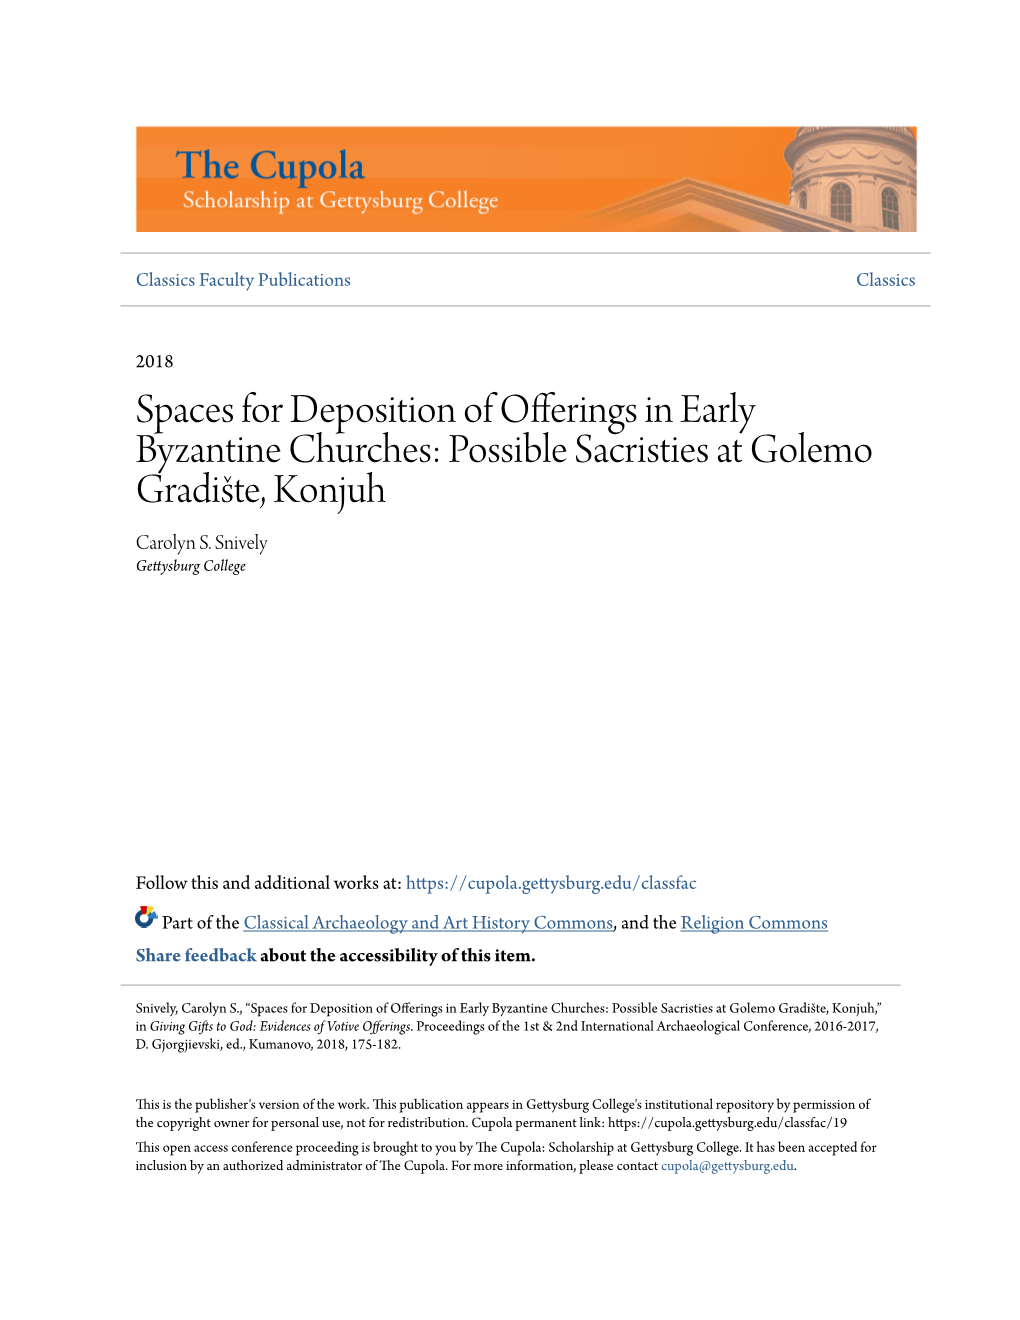 Spaces for Deposition of Offerings in Early Byzantine Churches: Possible Sacristies at Golemo Gradište, Konjuh Carolyn S